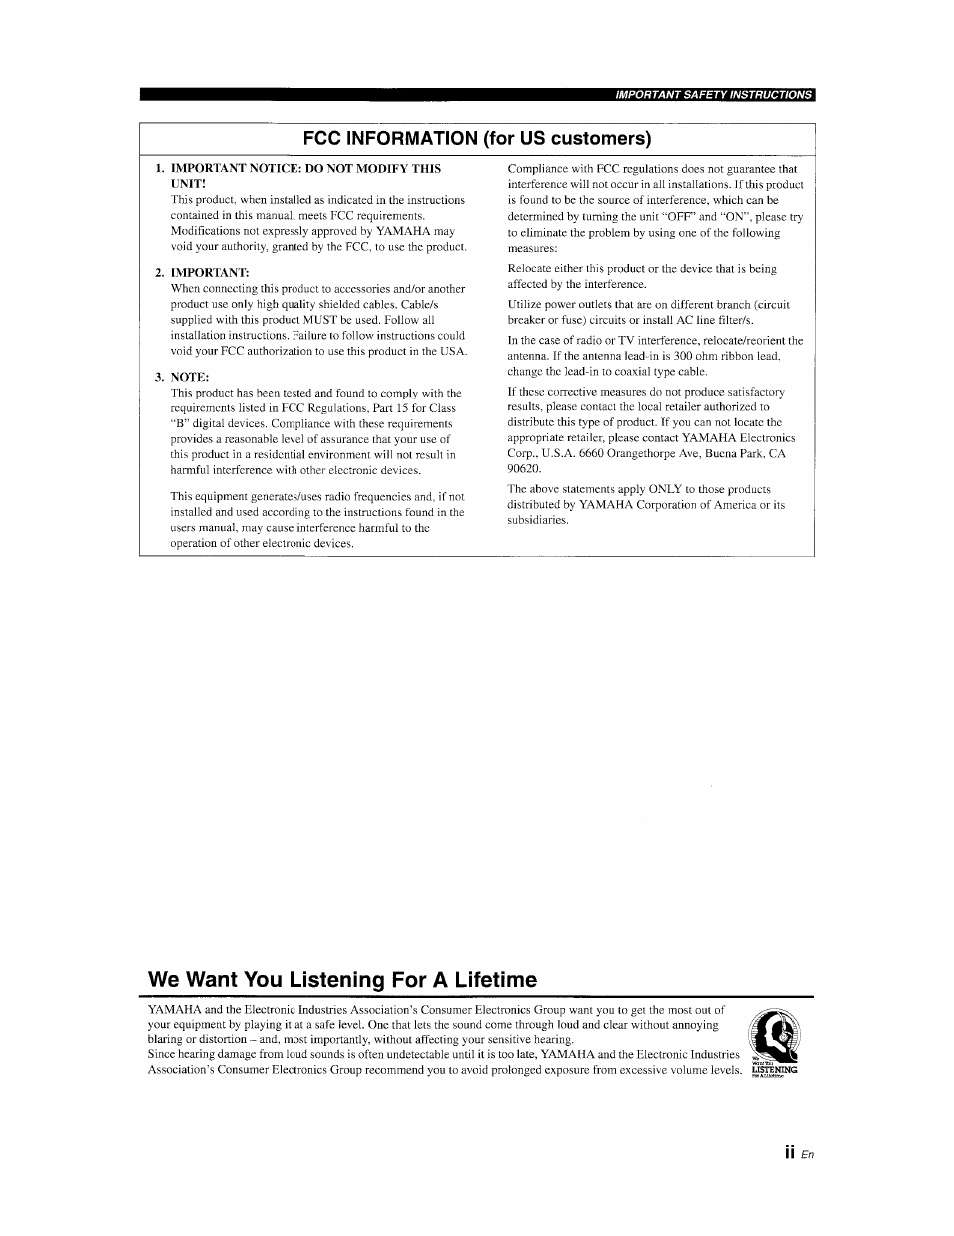 Fcc information (for us customers), We want you listening for a lifetime | Yamaha YSP-1100 User Manual | Page 3 / 104